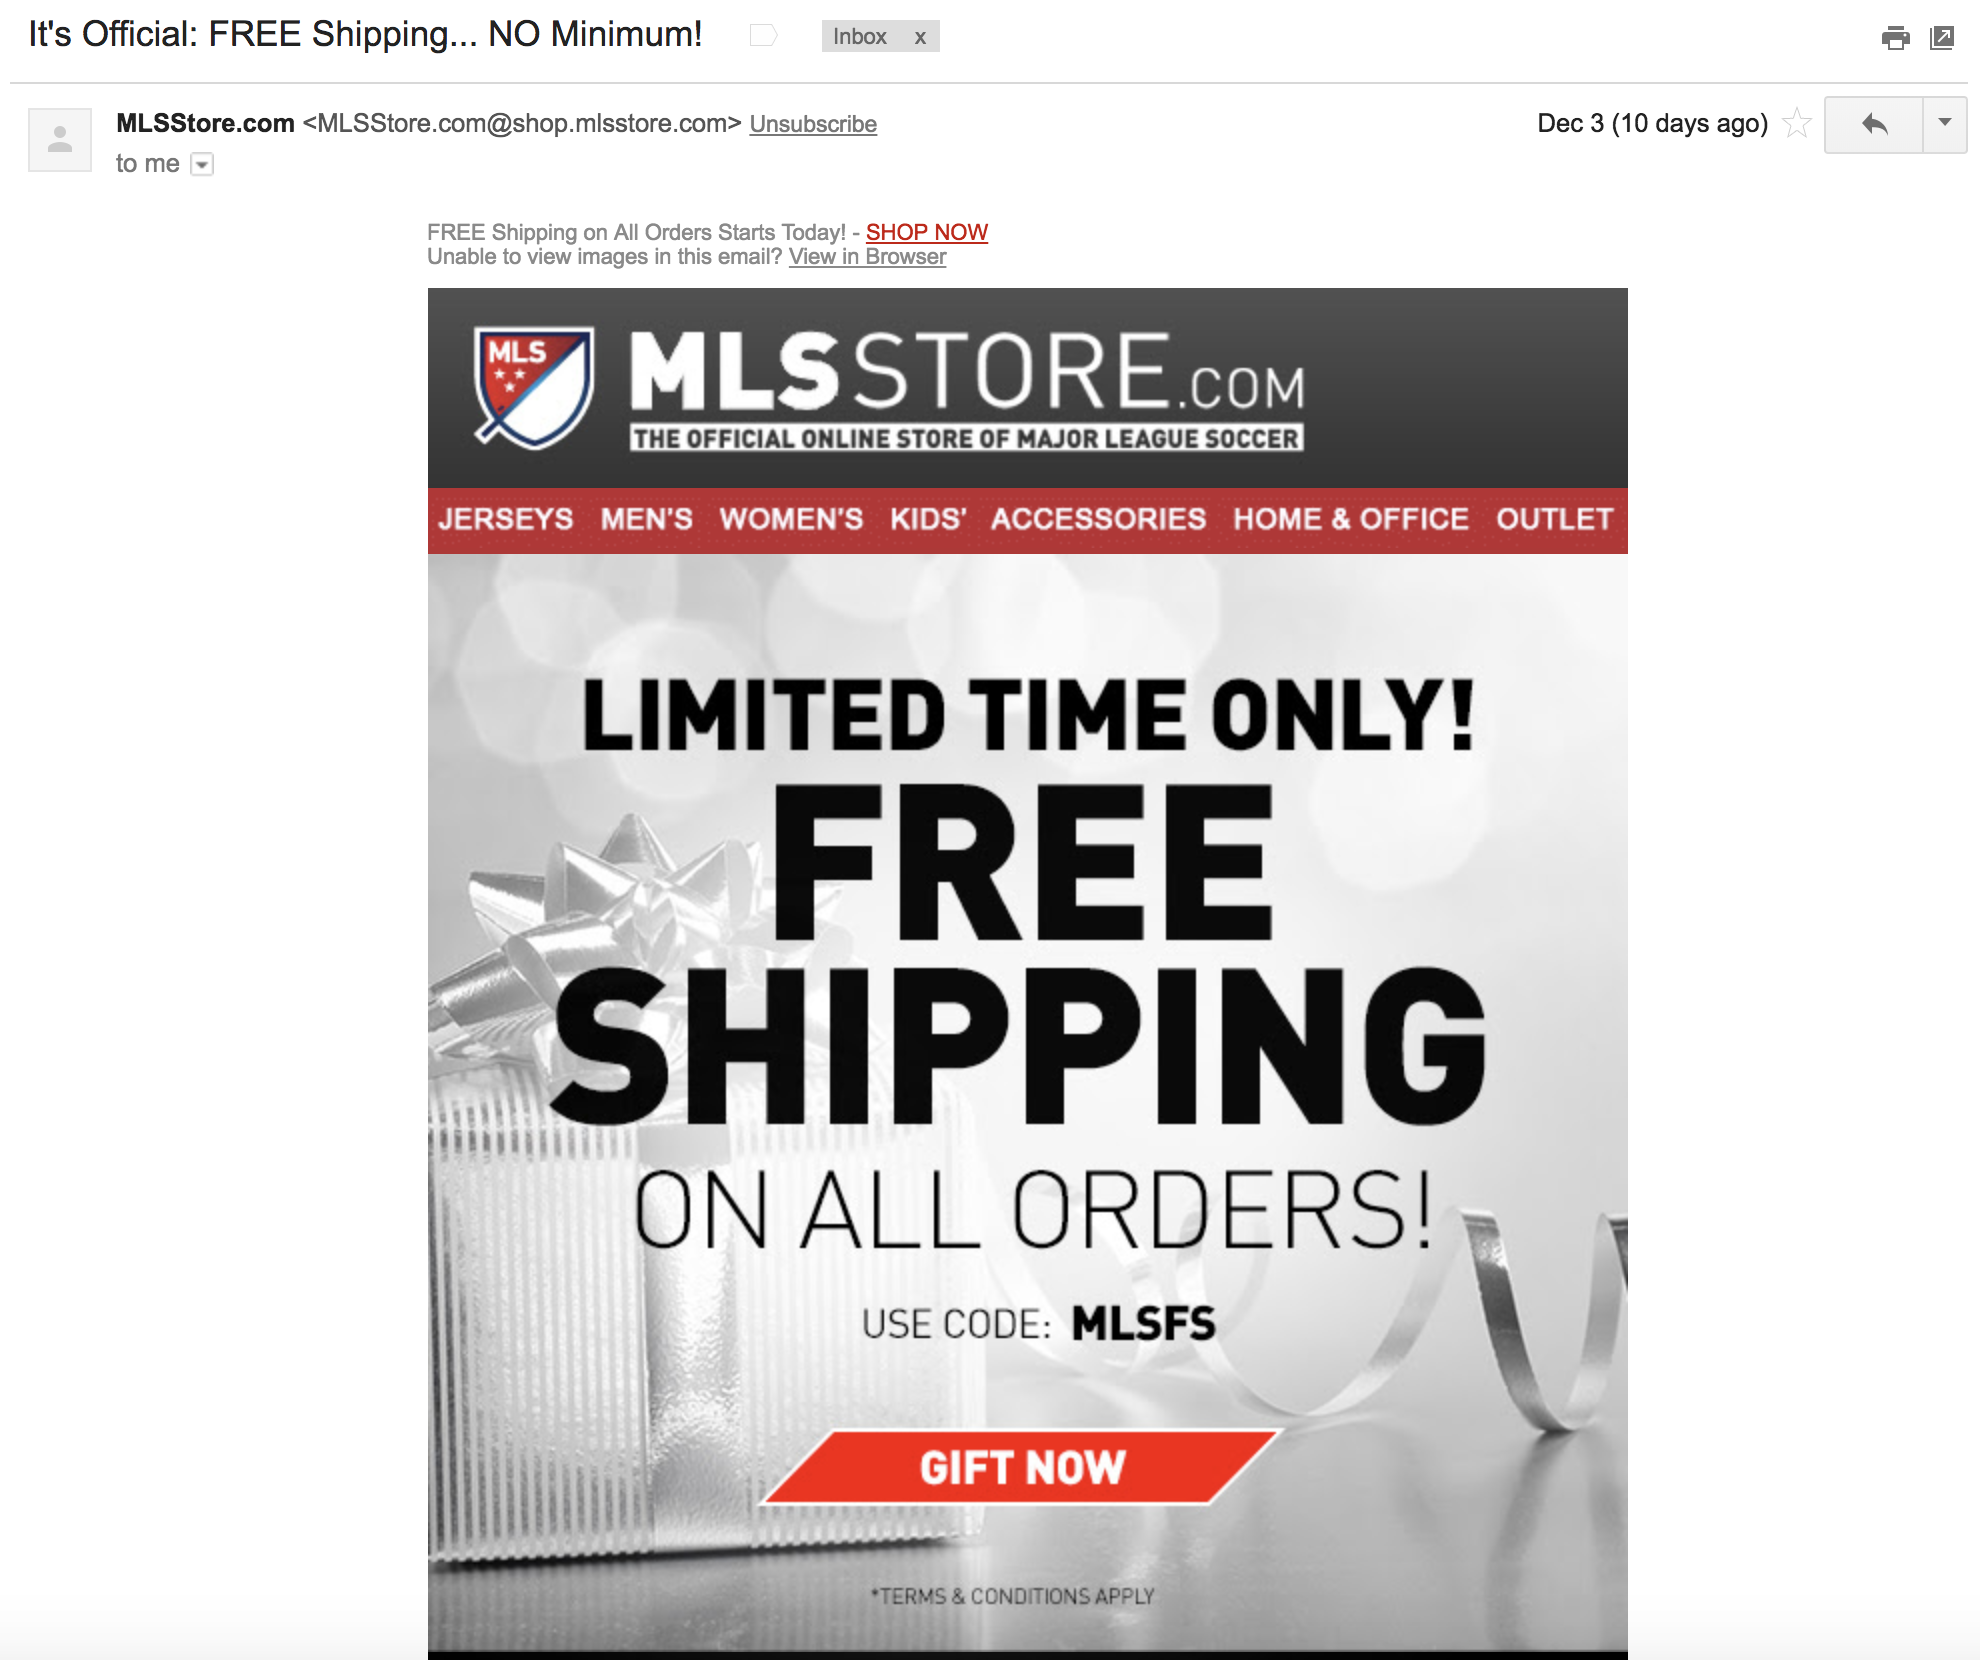 Screenshot showing an email by mlsstore.com